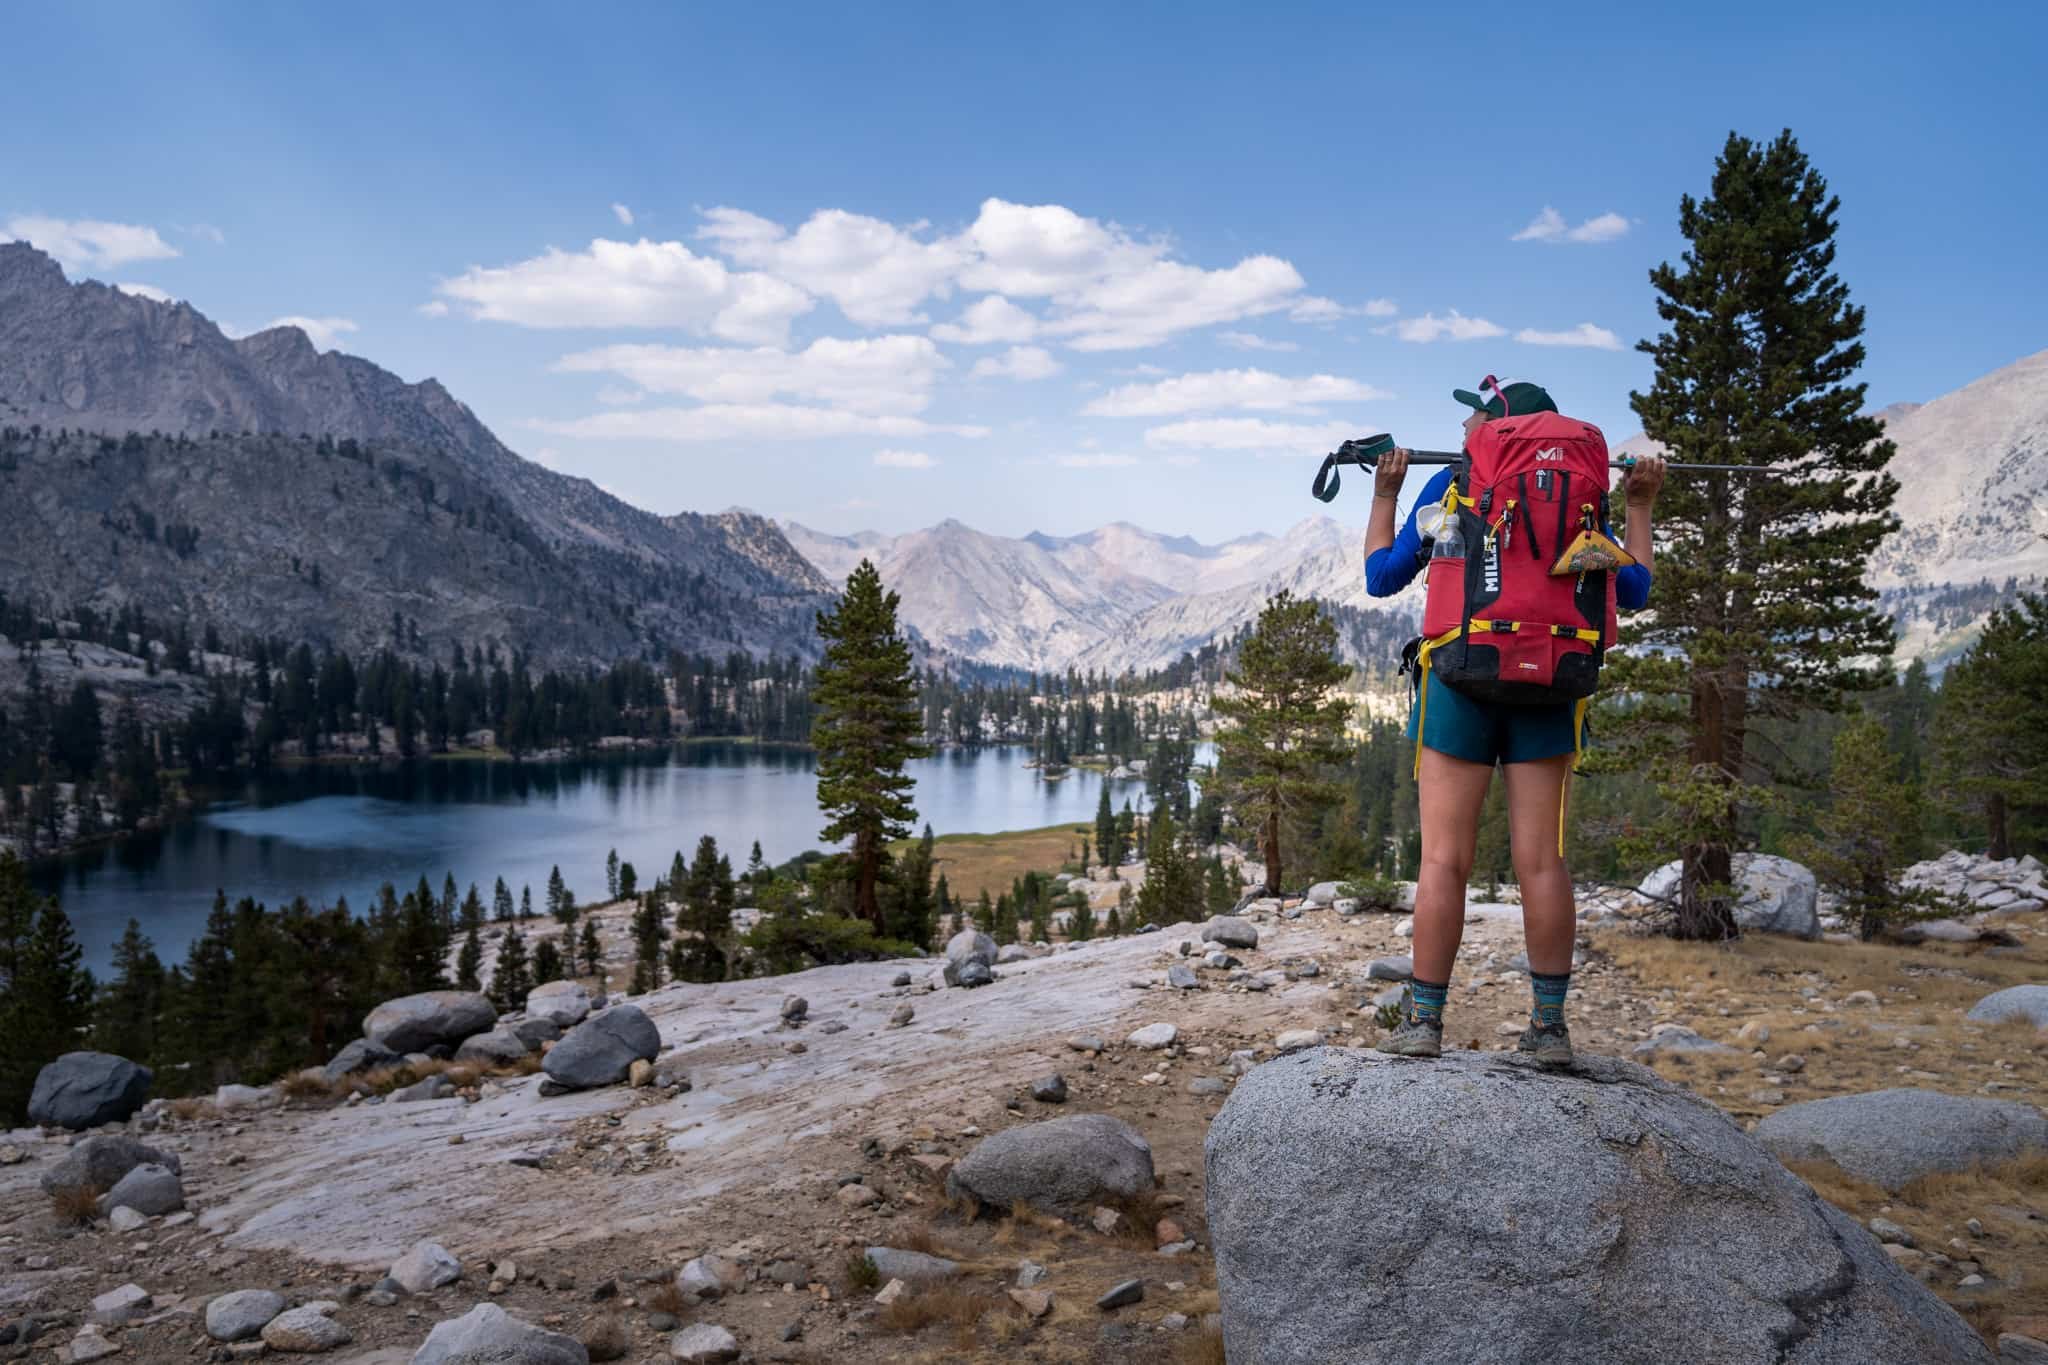 The 10 Best Hiking Underwear for Women (Trail-Tested & Highly